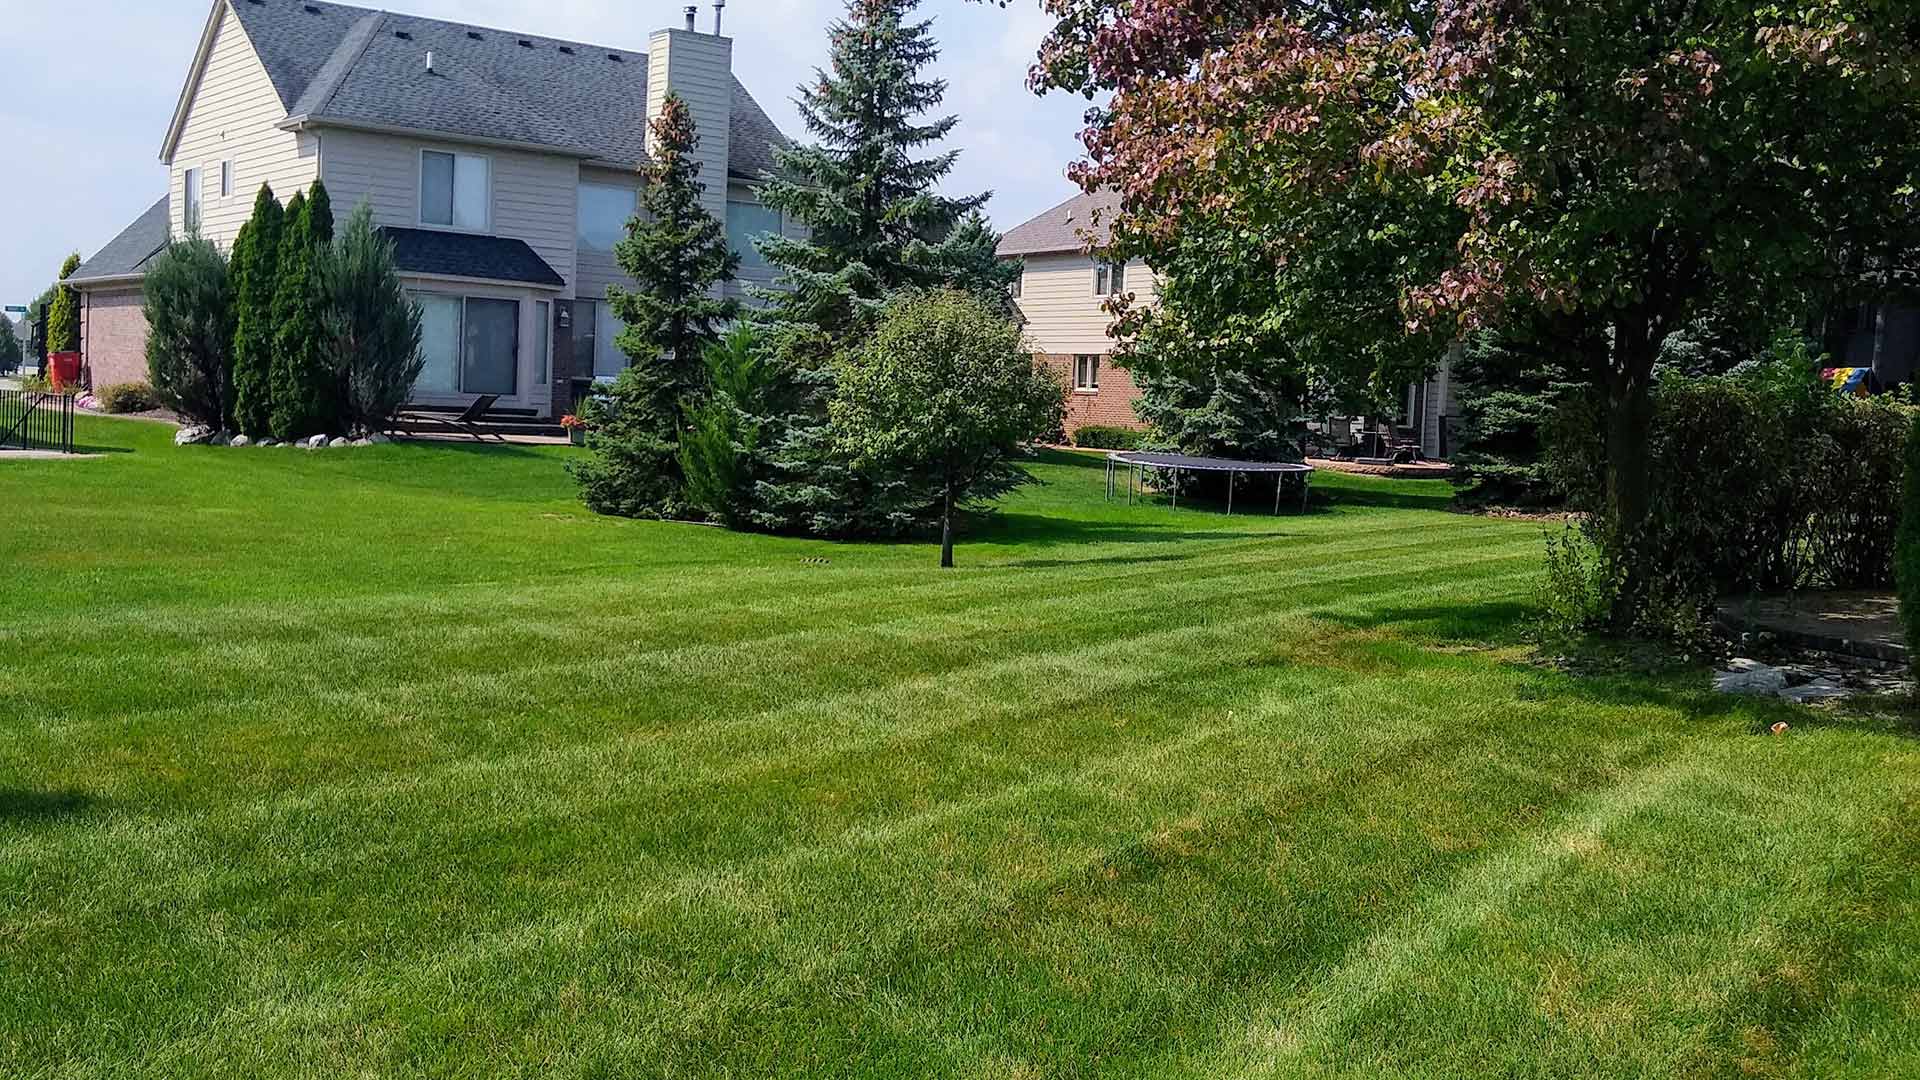 A Chesterfield, MI home with a healthy back yard showing mowing lines.